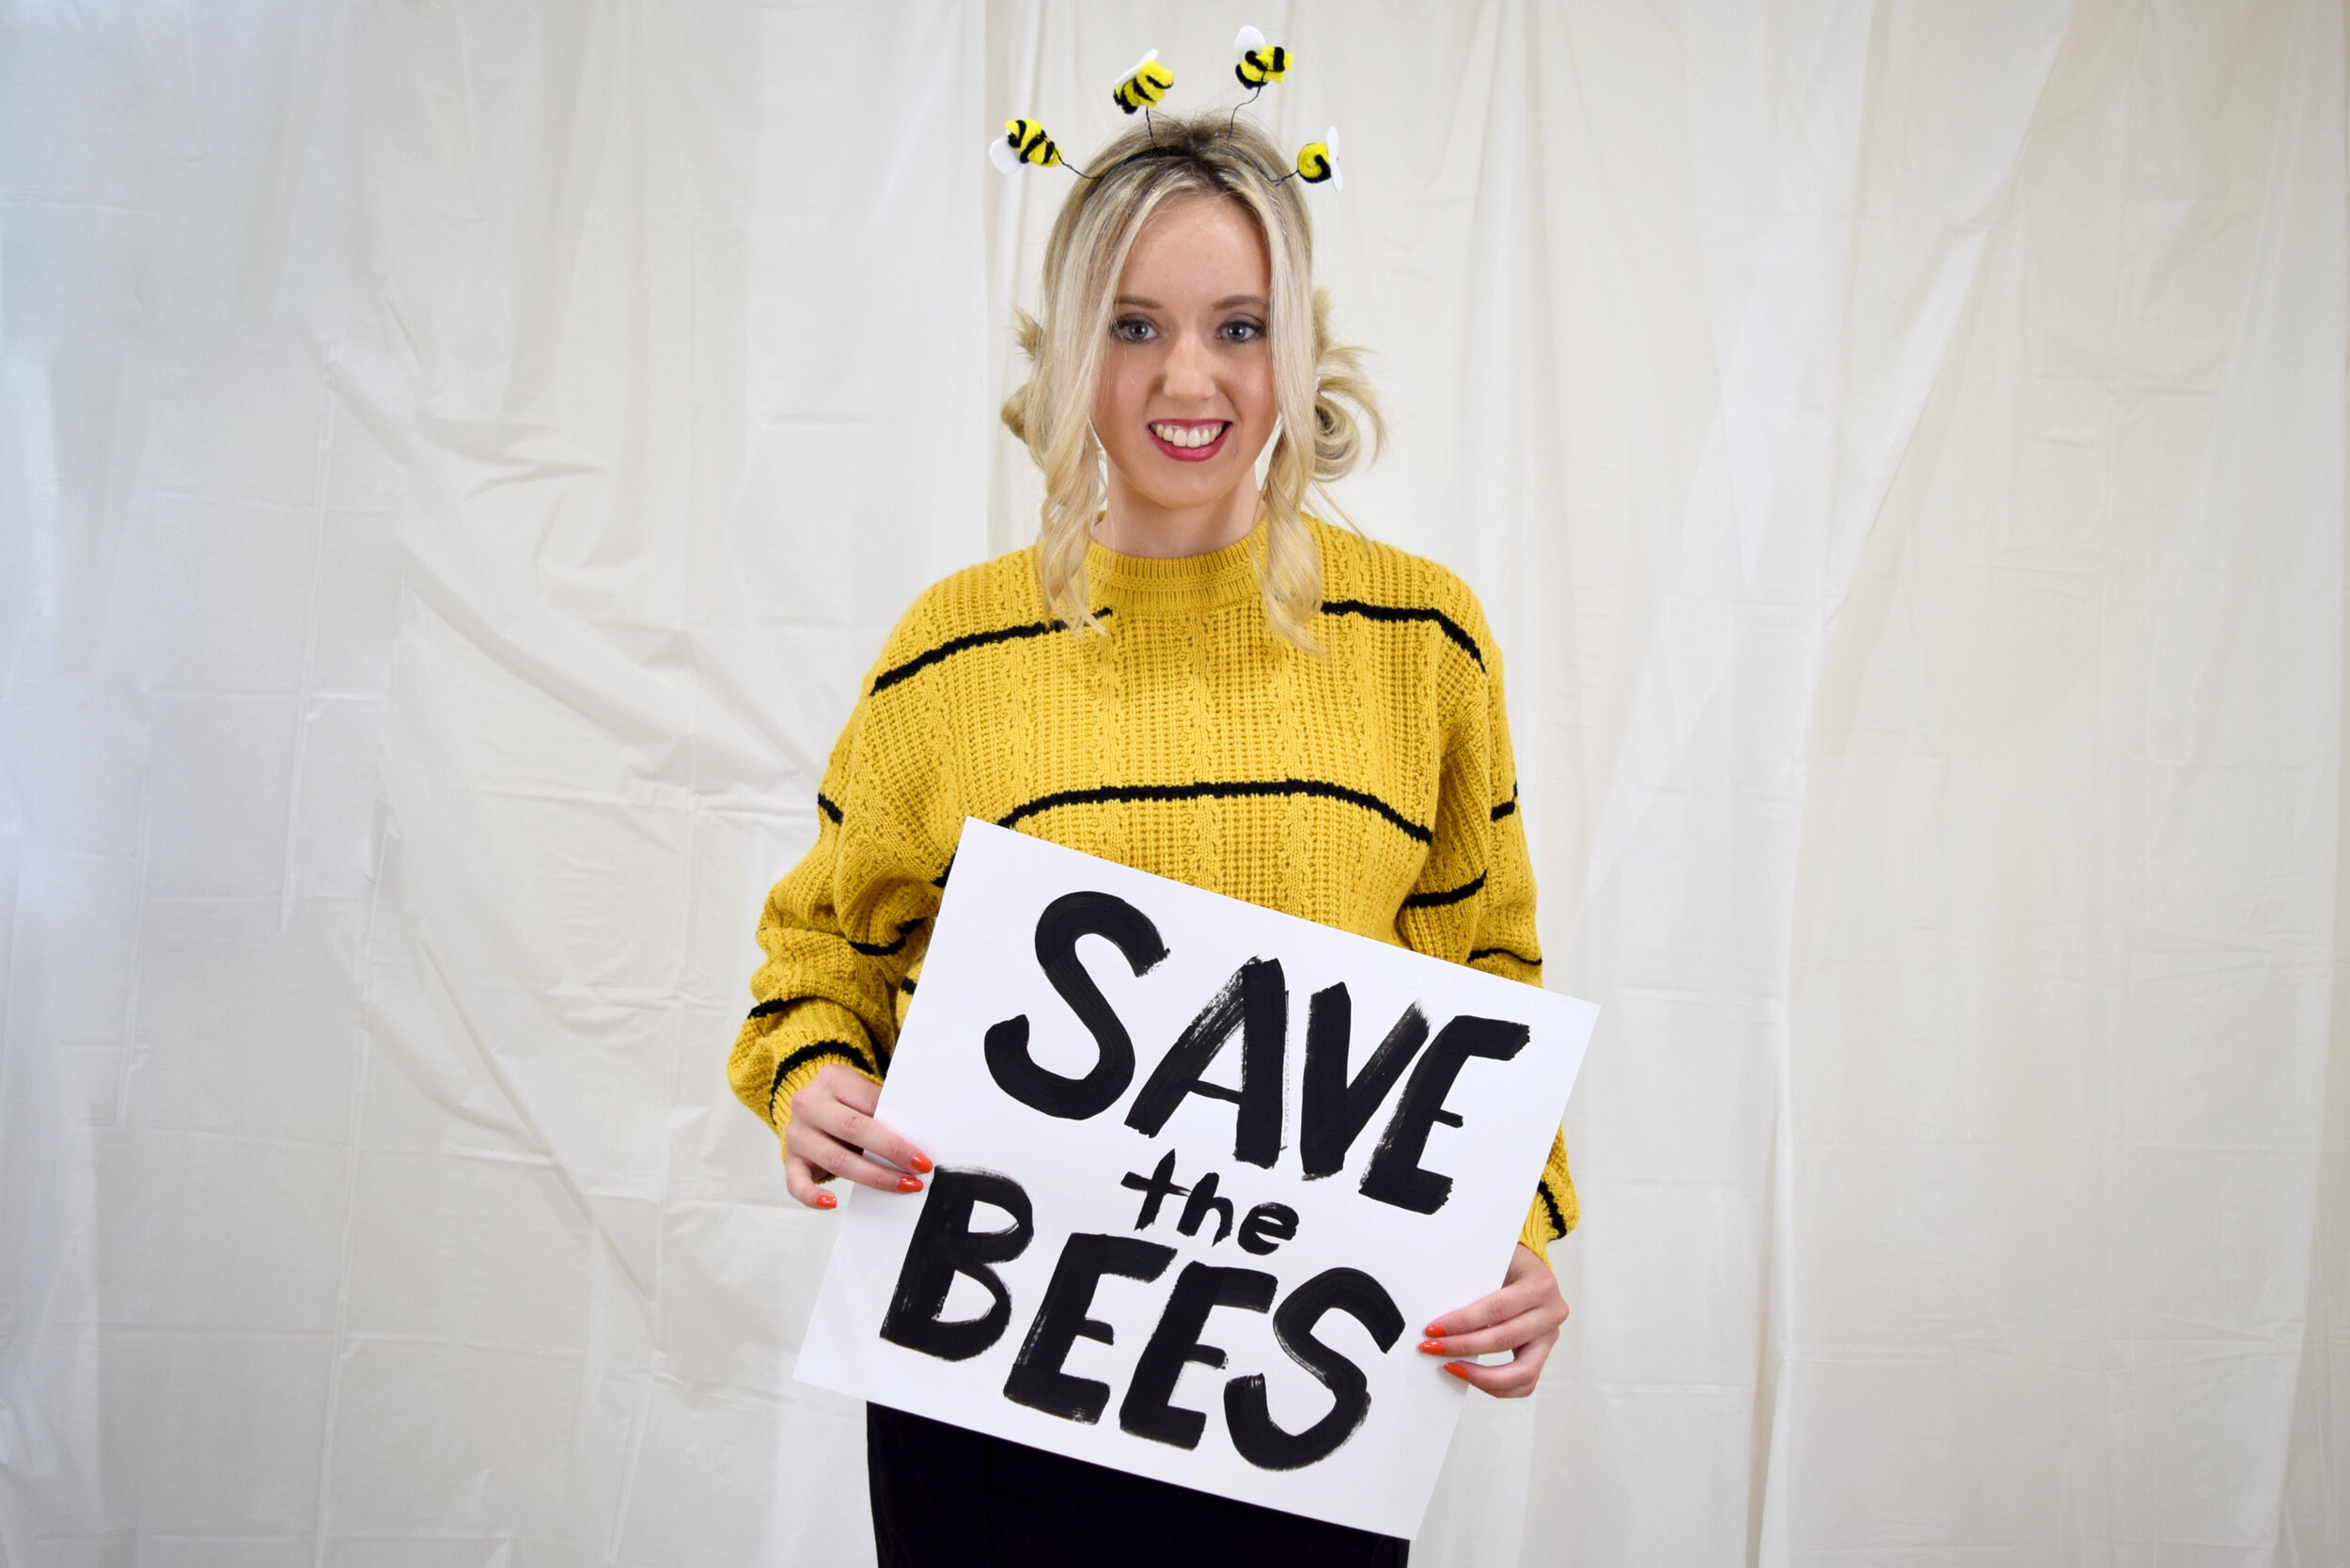 save-the-bees-costume-1.jpg